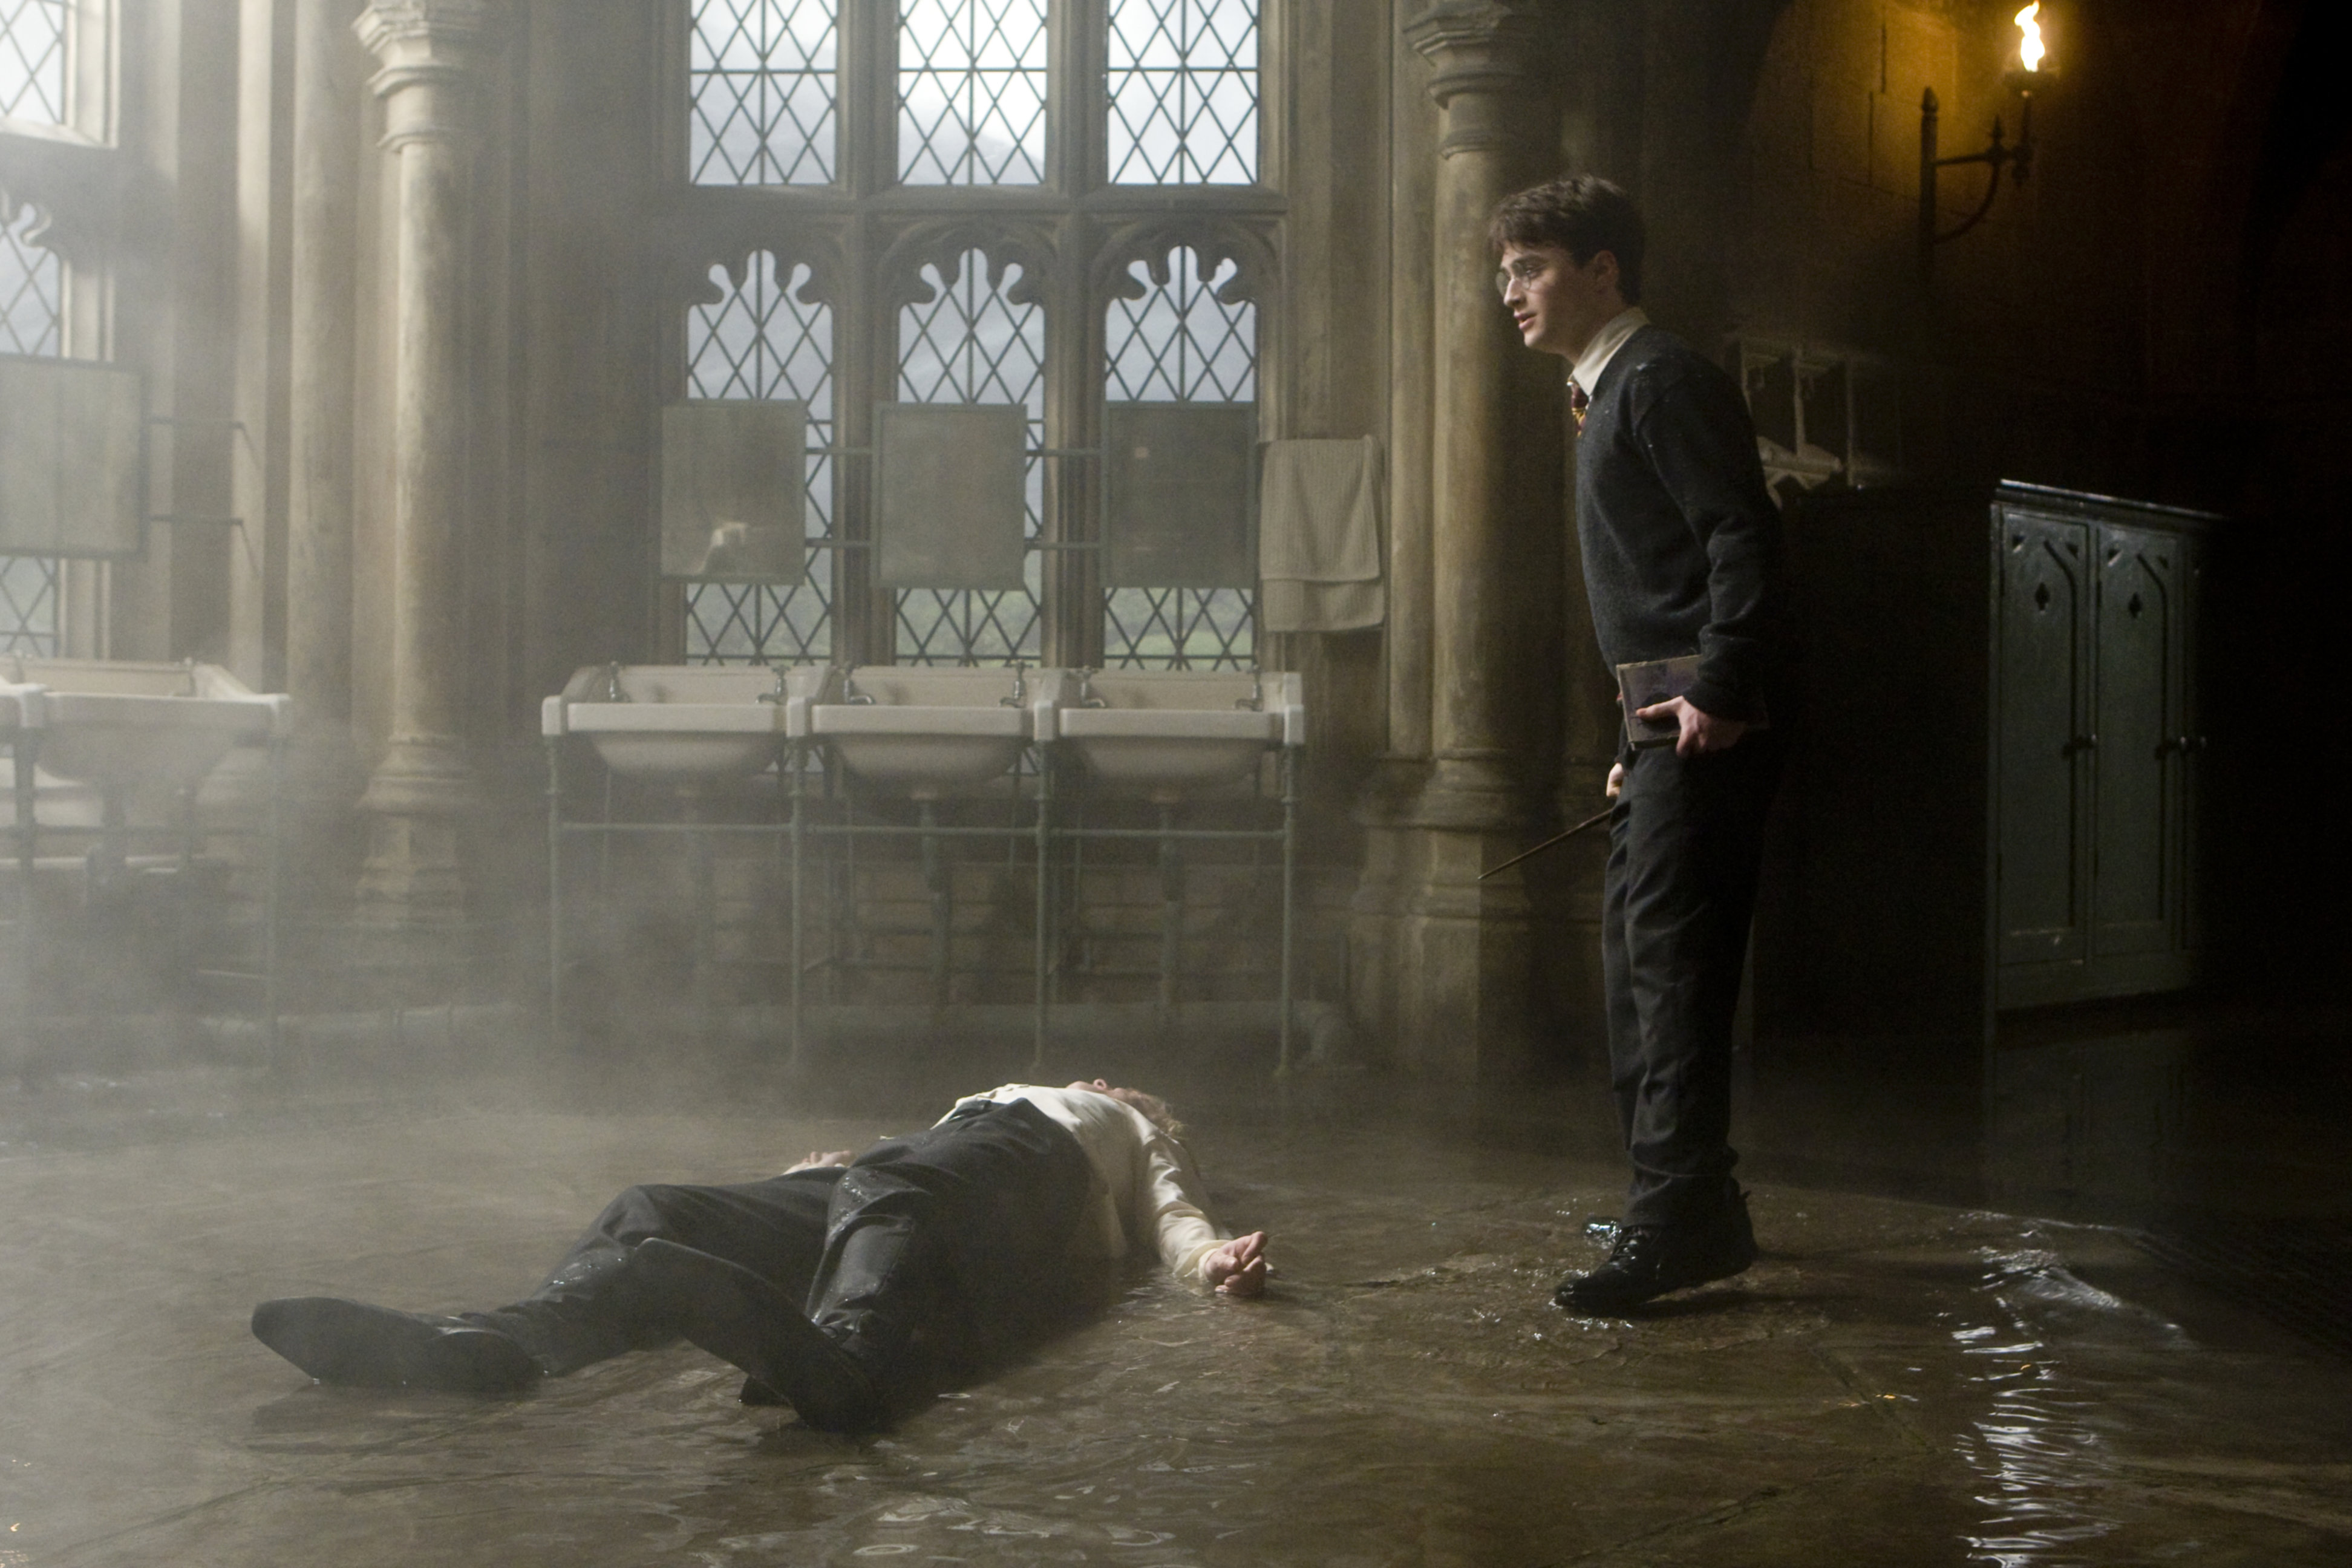  A still from Harry Potter and the Half Blood Prince